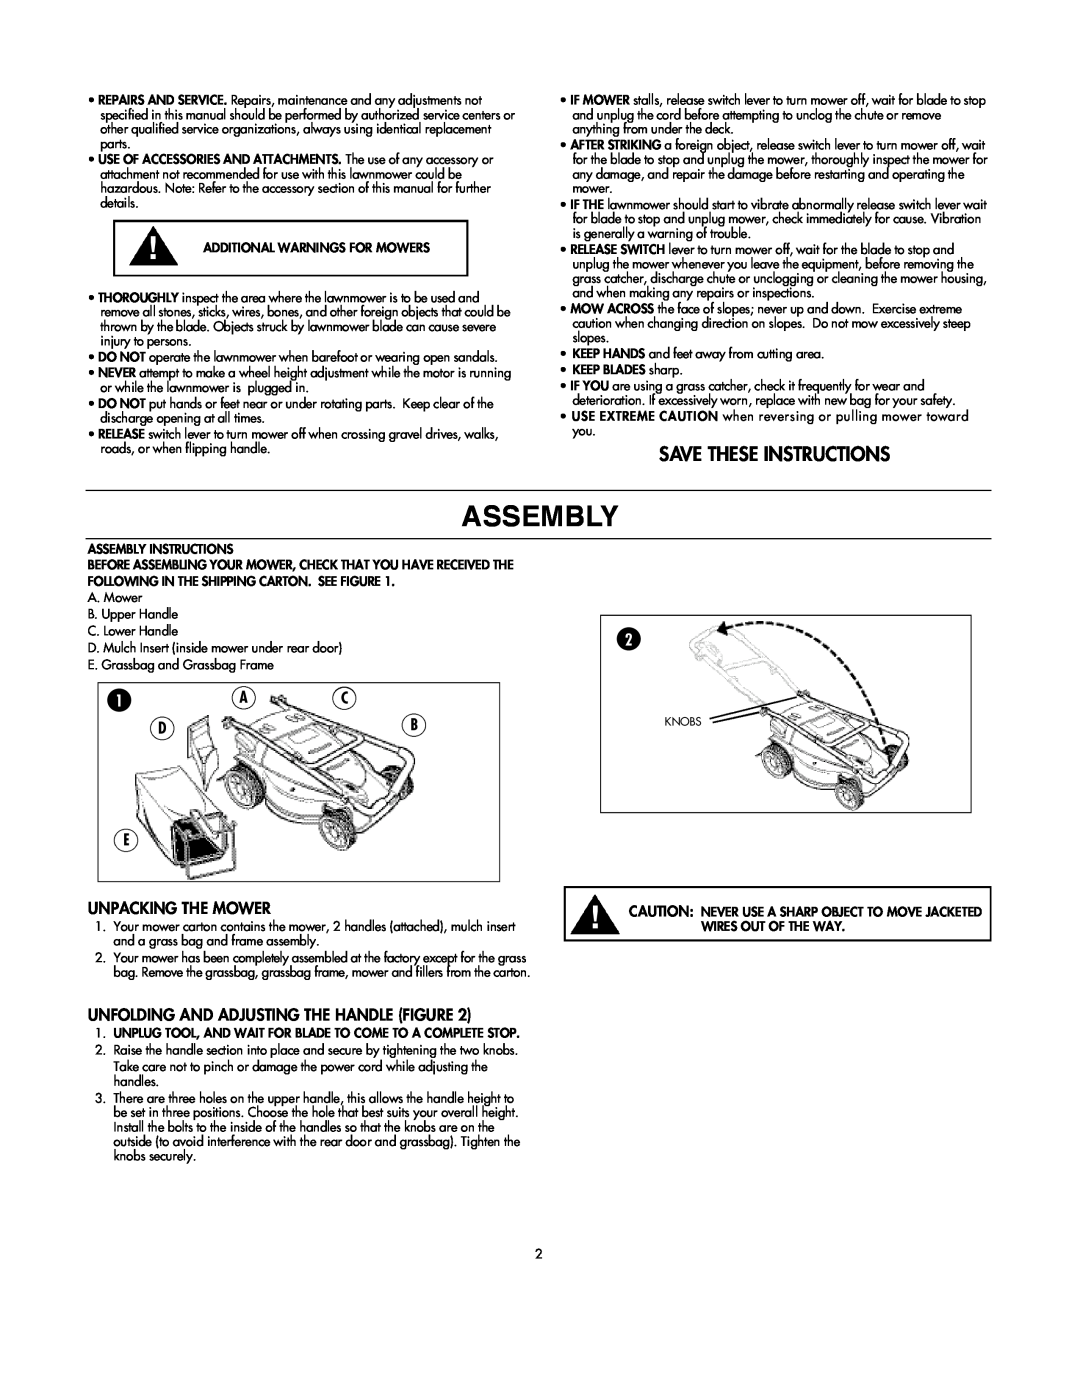 DeWalt C935-355190 Assembly, Save These Instructions, Unpacking The Mower, Unfolding And Adjusting The Handle Figure 